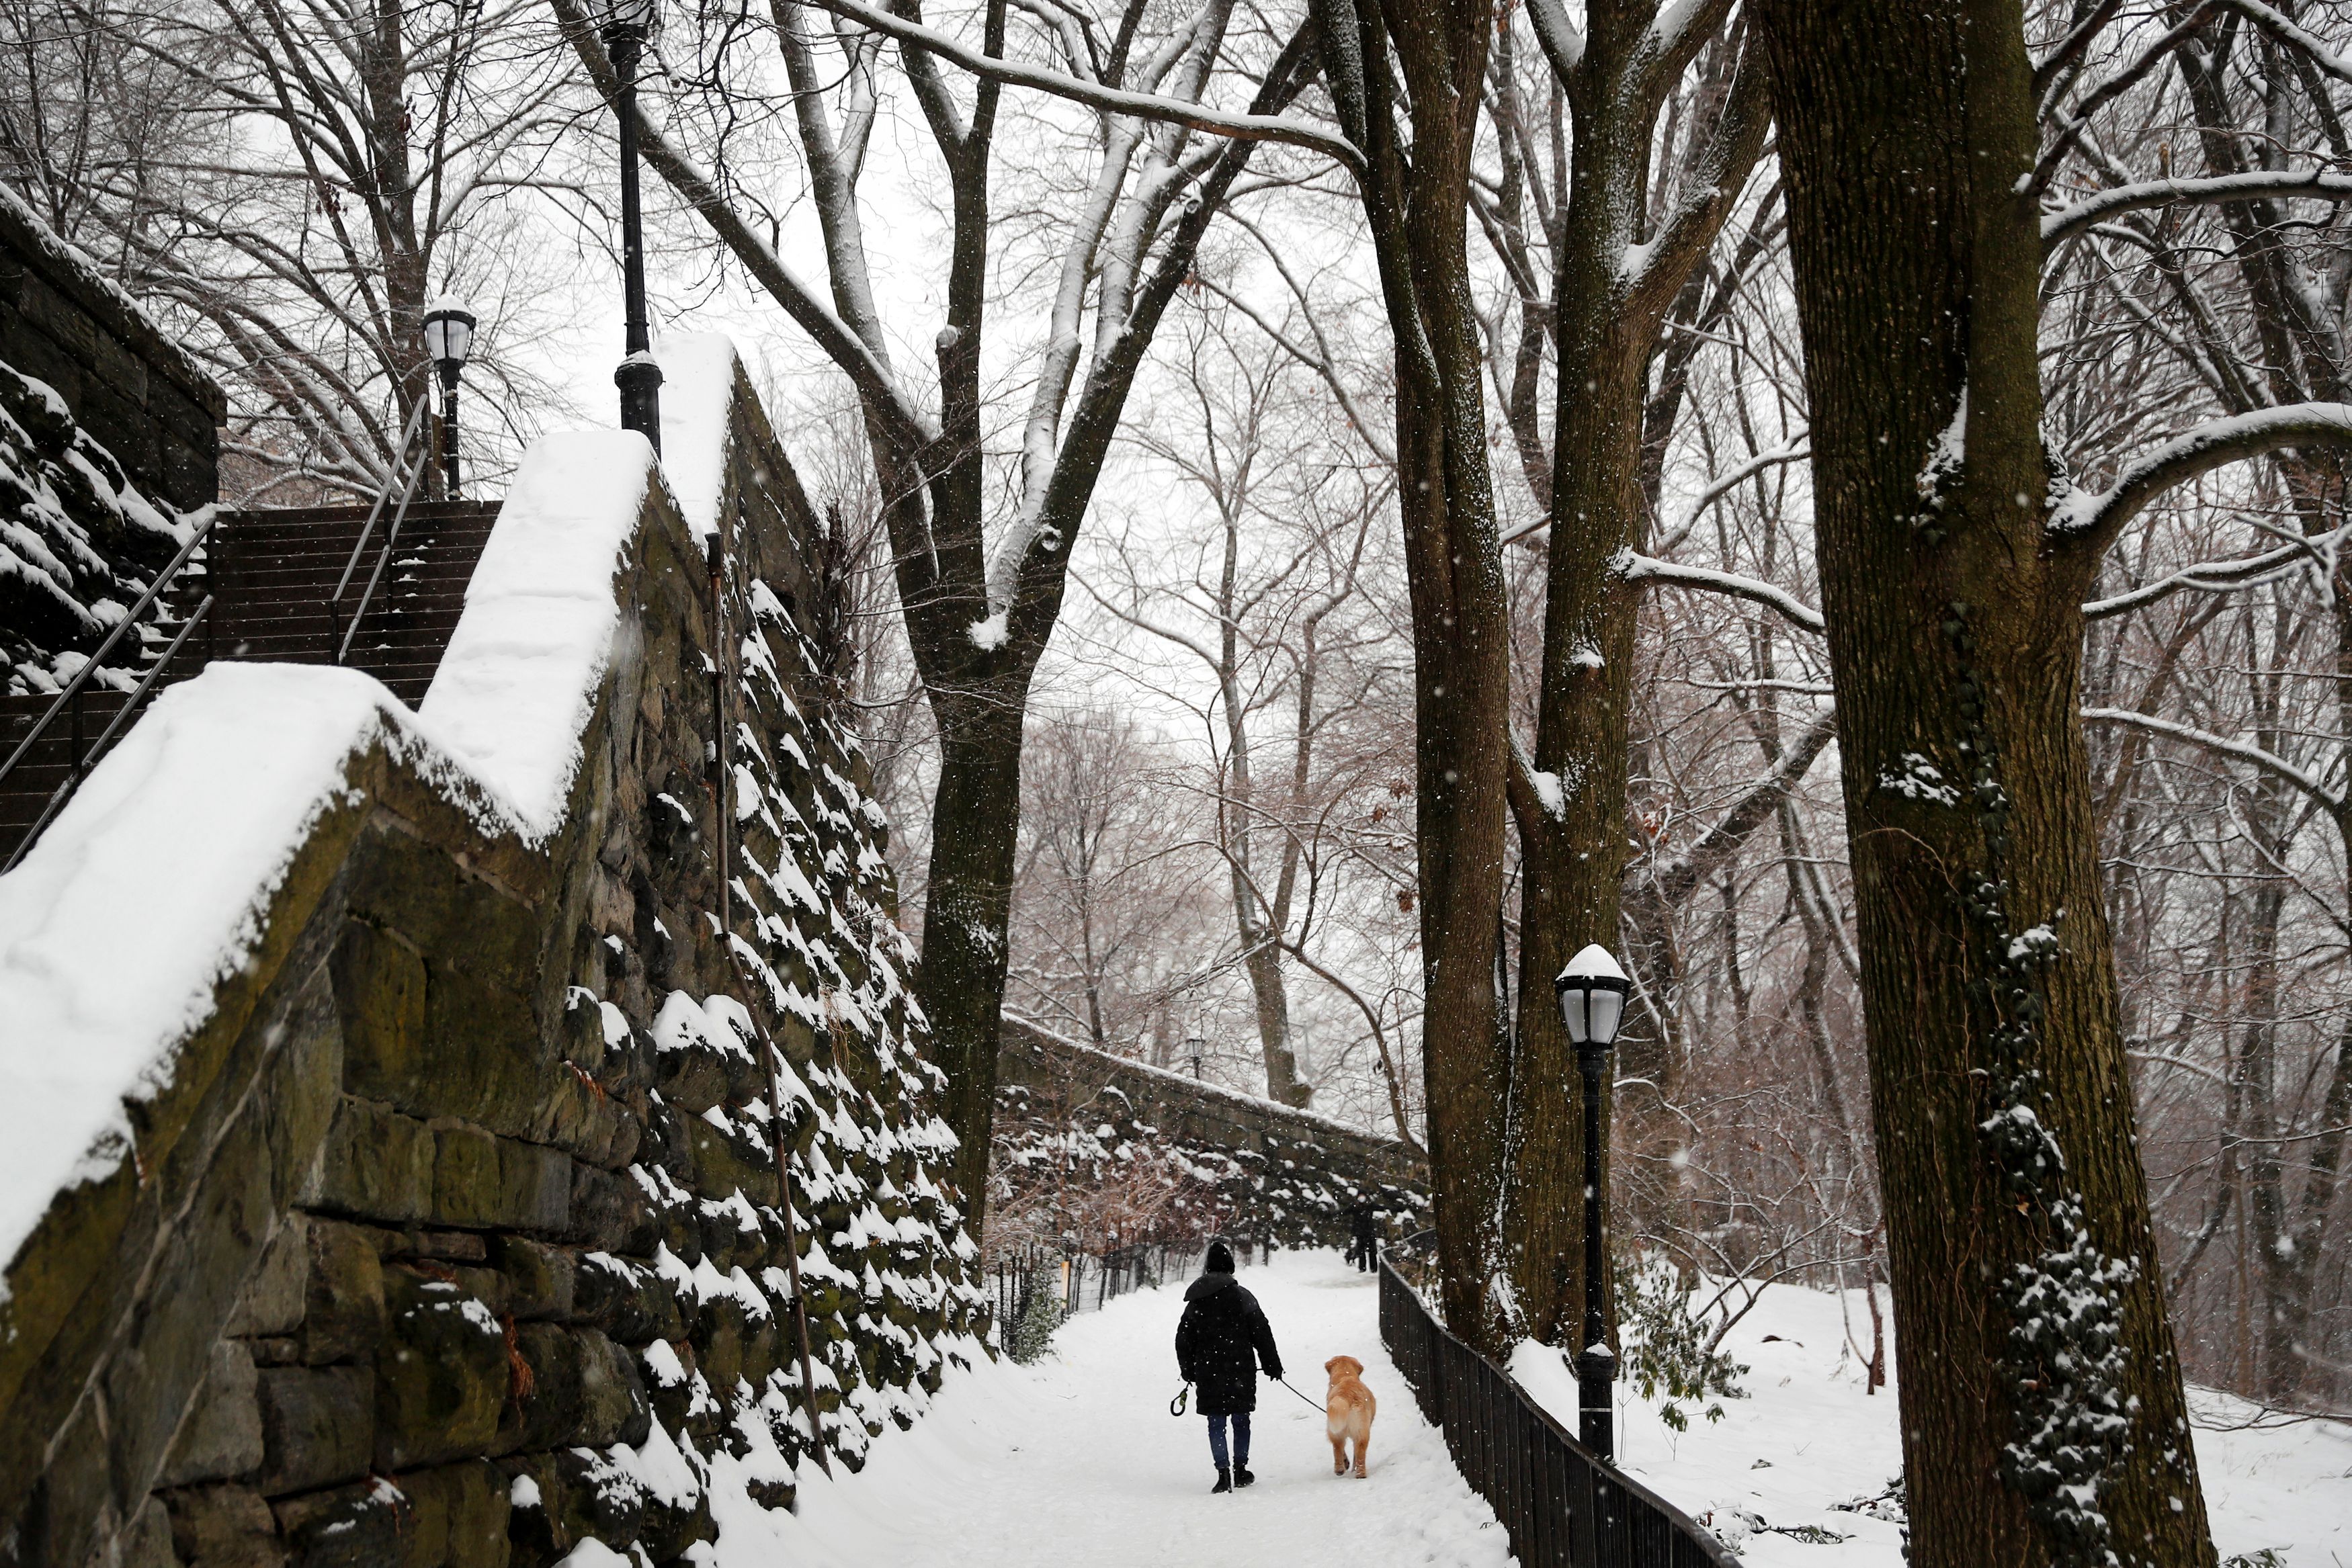 A woman walks a dog in falling snow in Riverside Park during a winter storm in New York